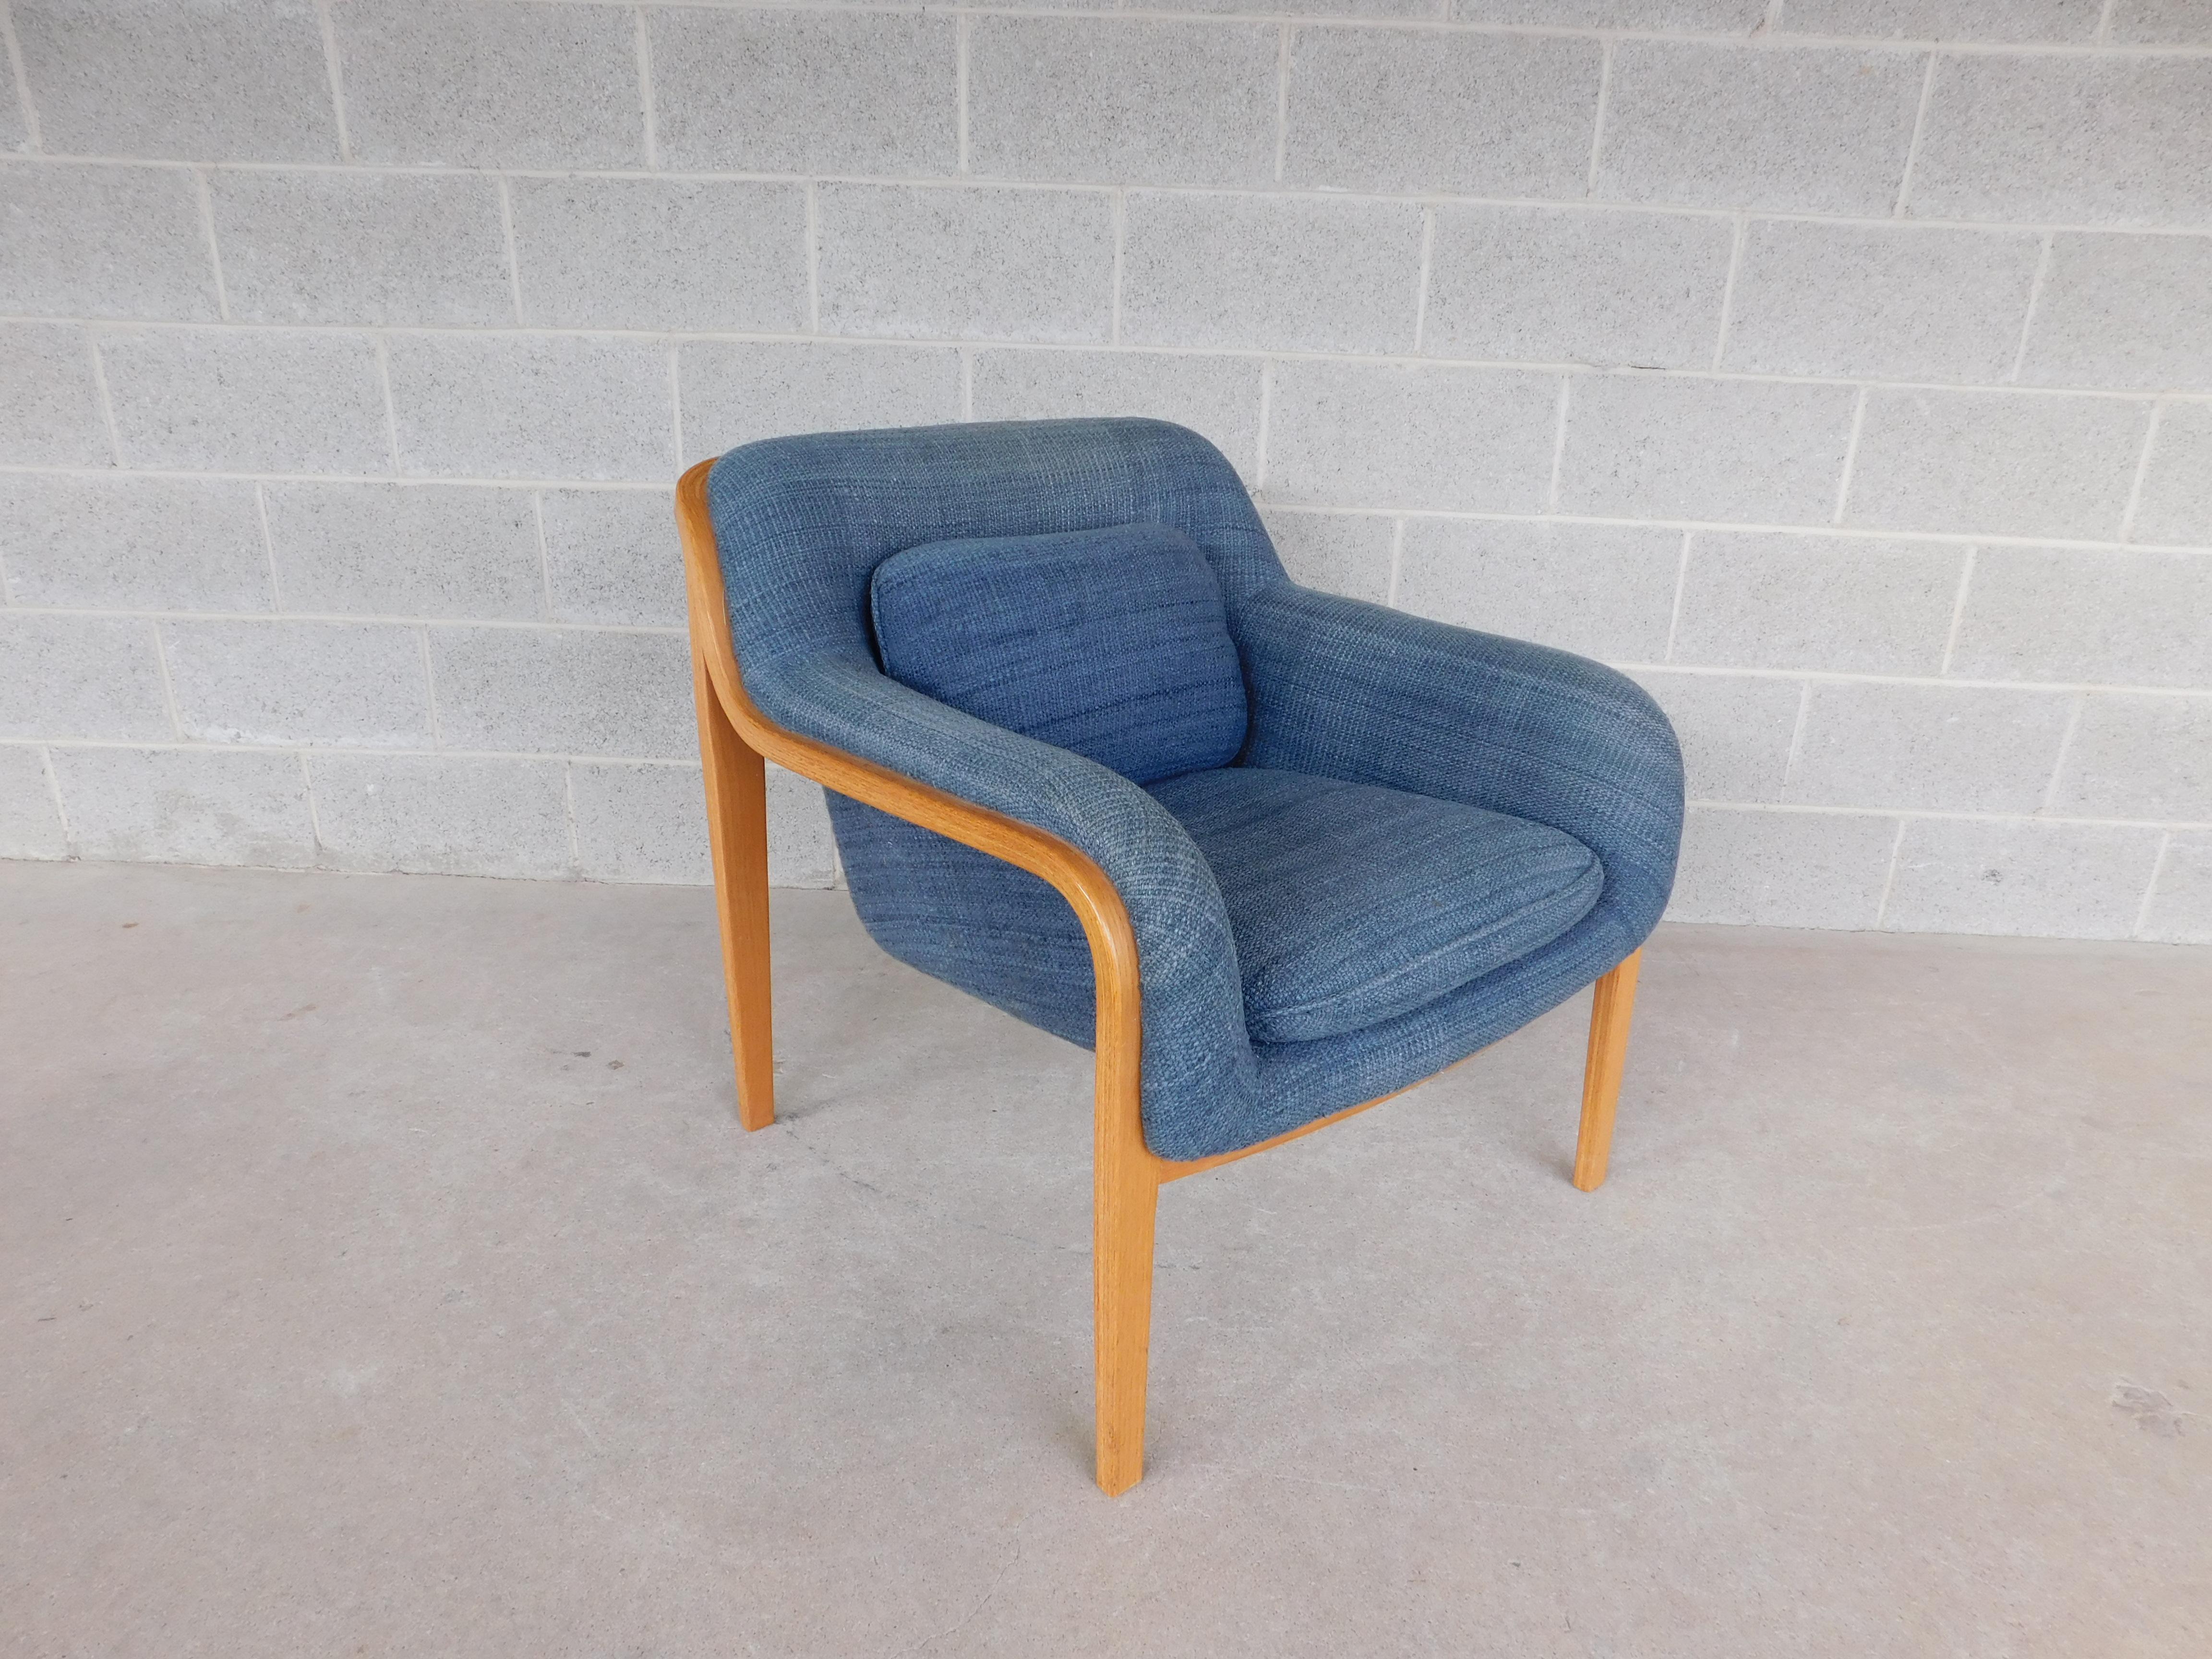 Midcentury Bentwood Lounge Chair by Bill Stephens for Knoll In Good Condition For Sale In Parkesburg, PA